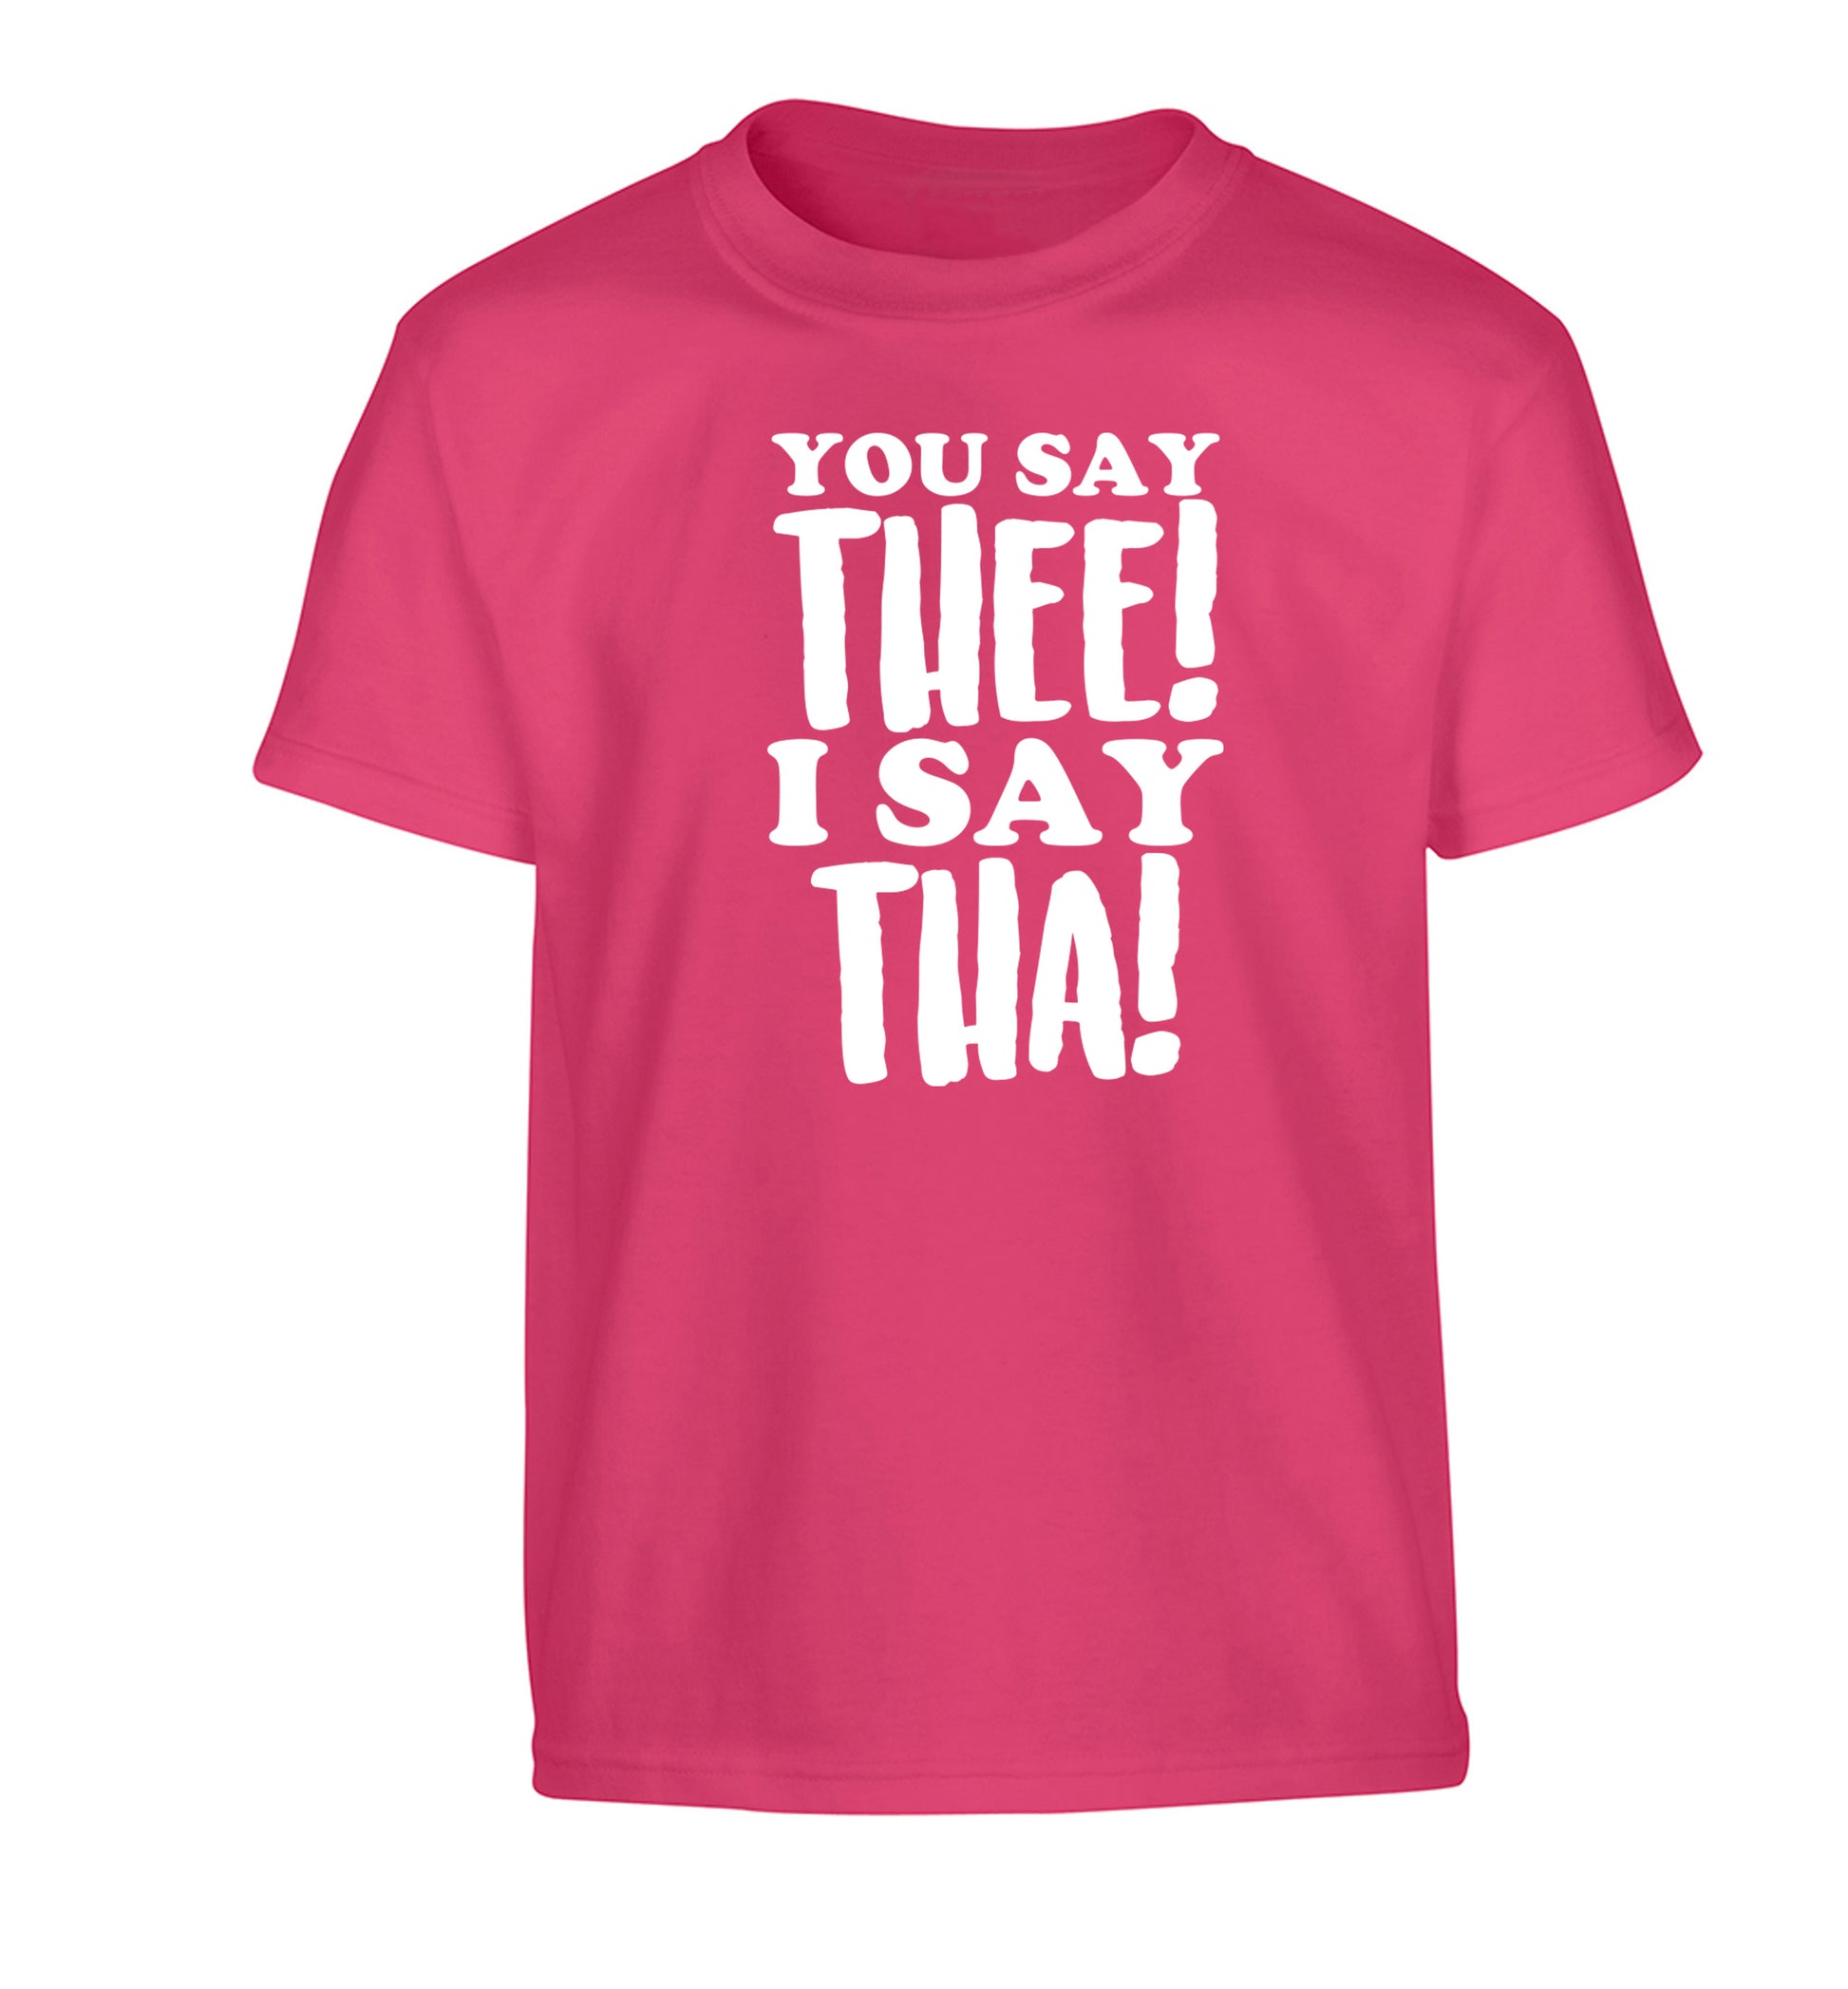 You say thee I say tha Children's pink Tshirt 12-14 Years